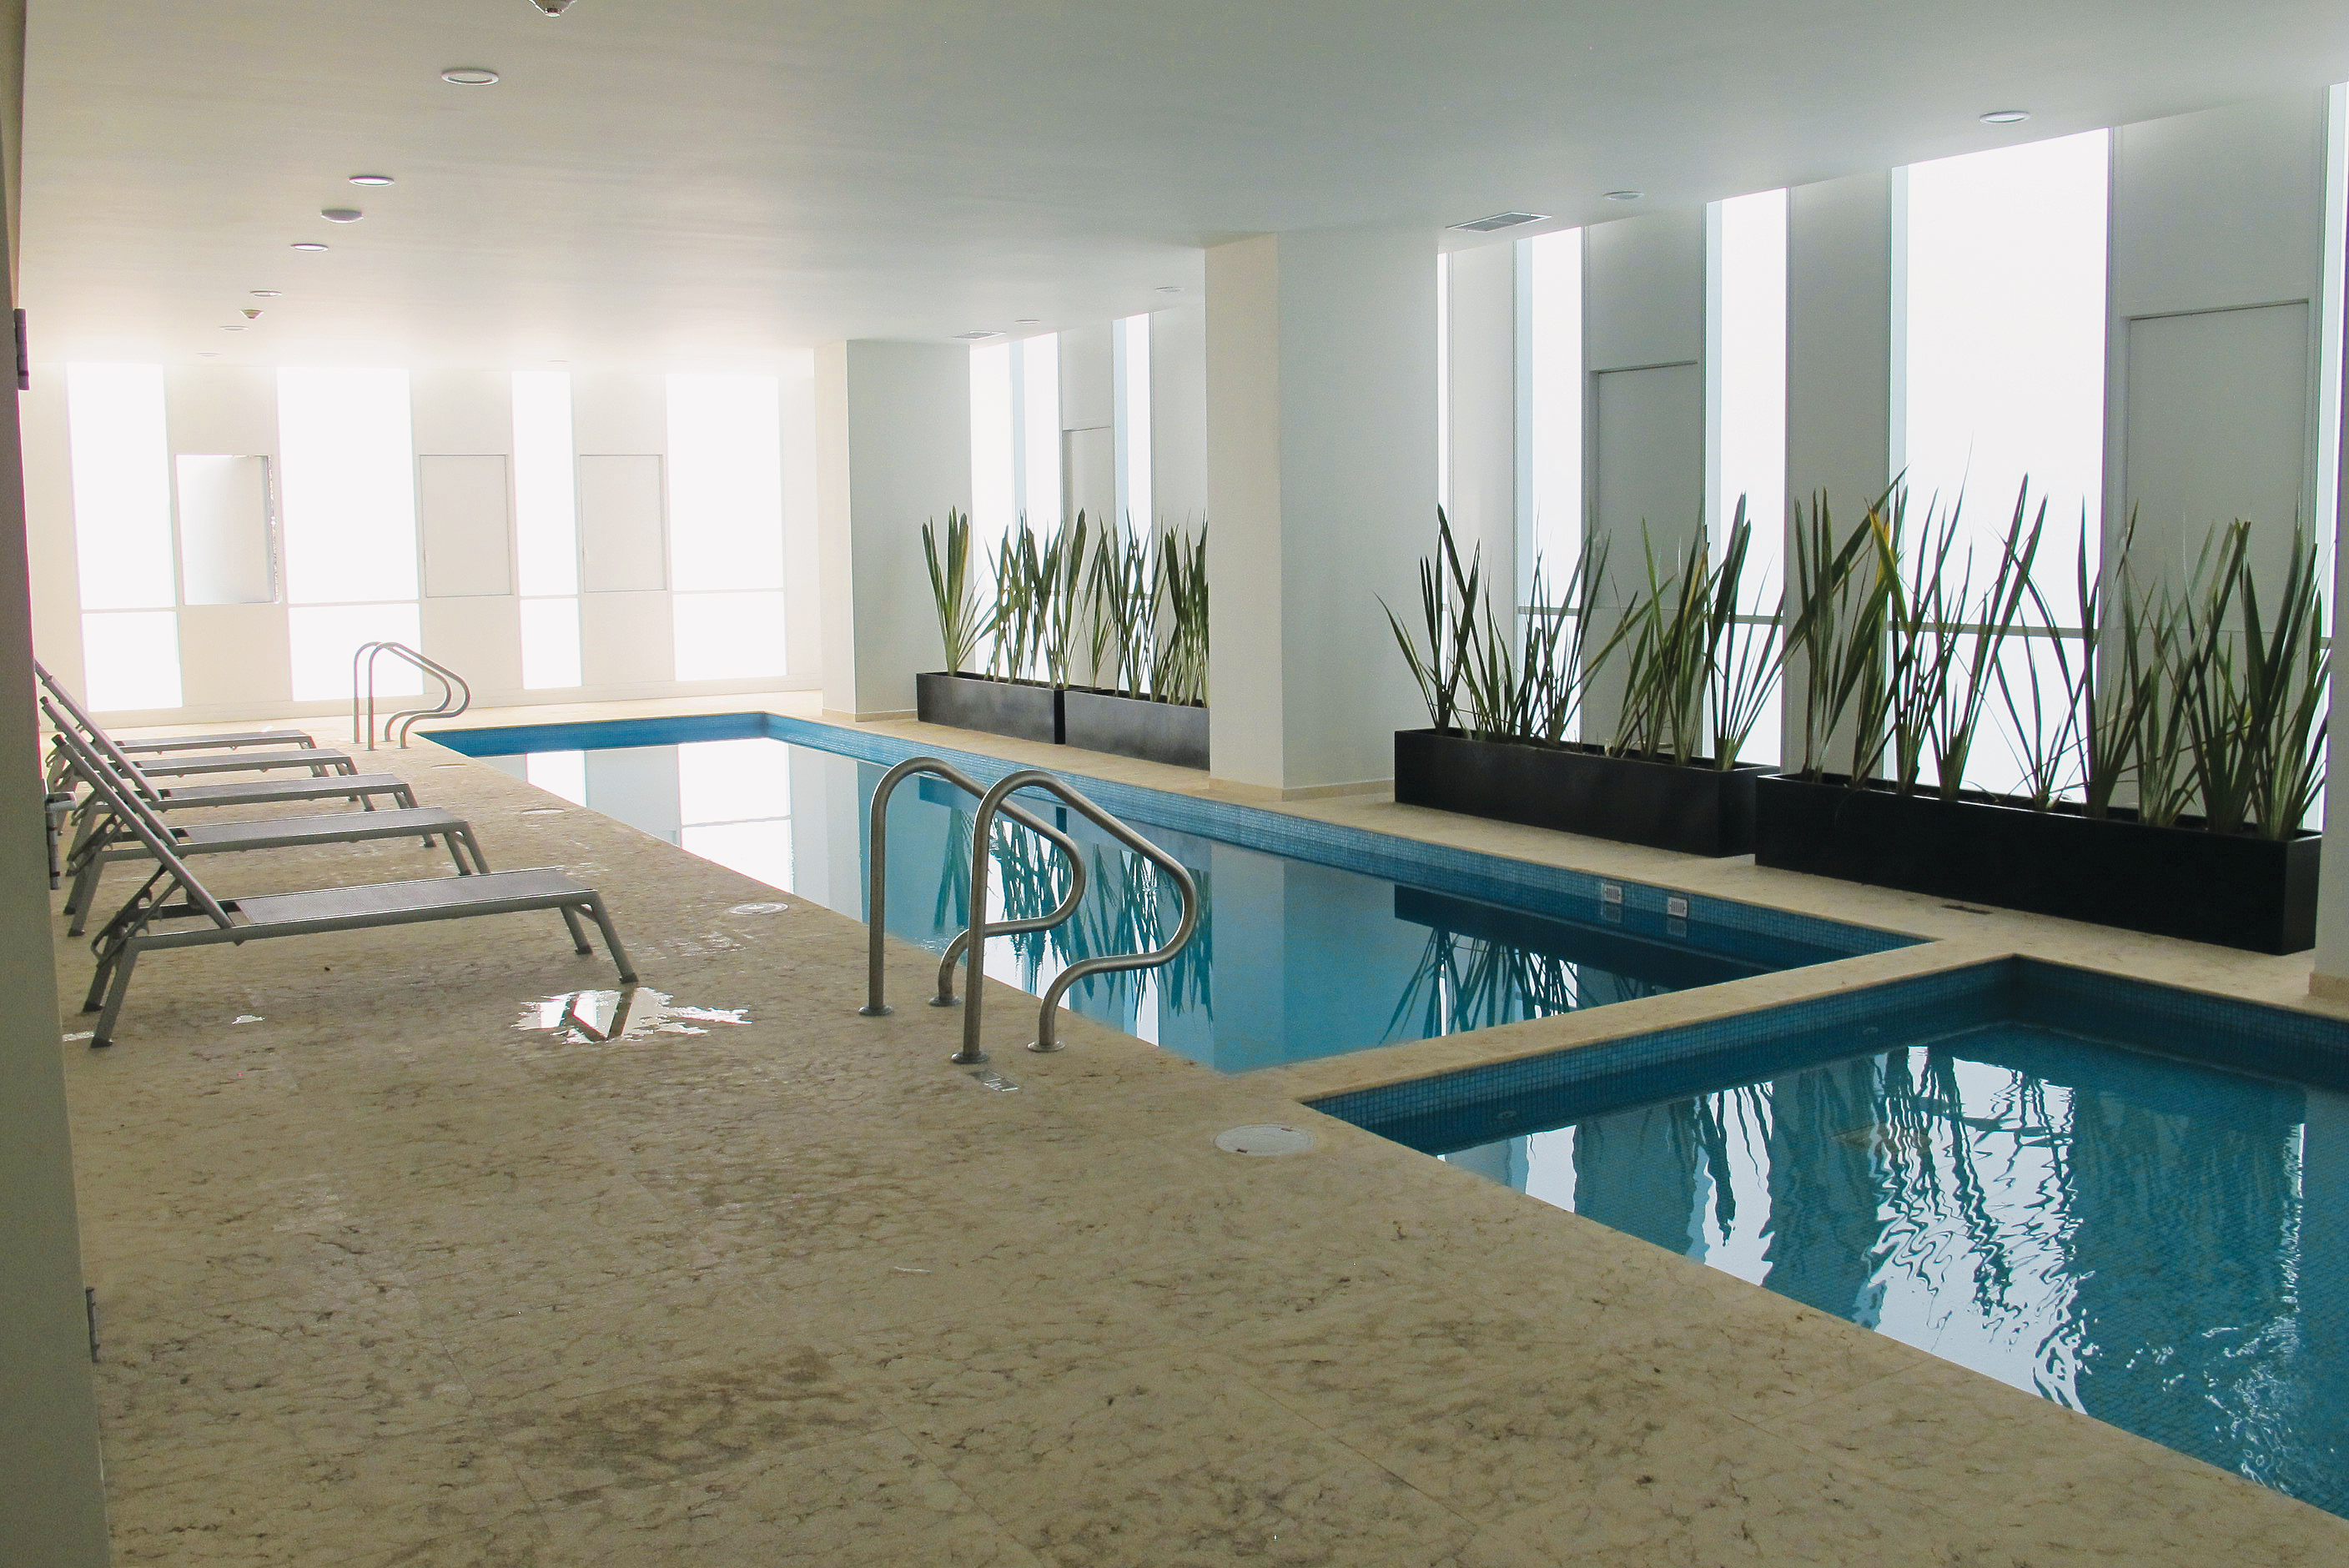 Image of the indoor pool at the Carso corporate housing building